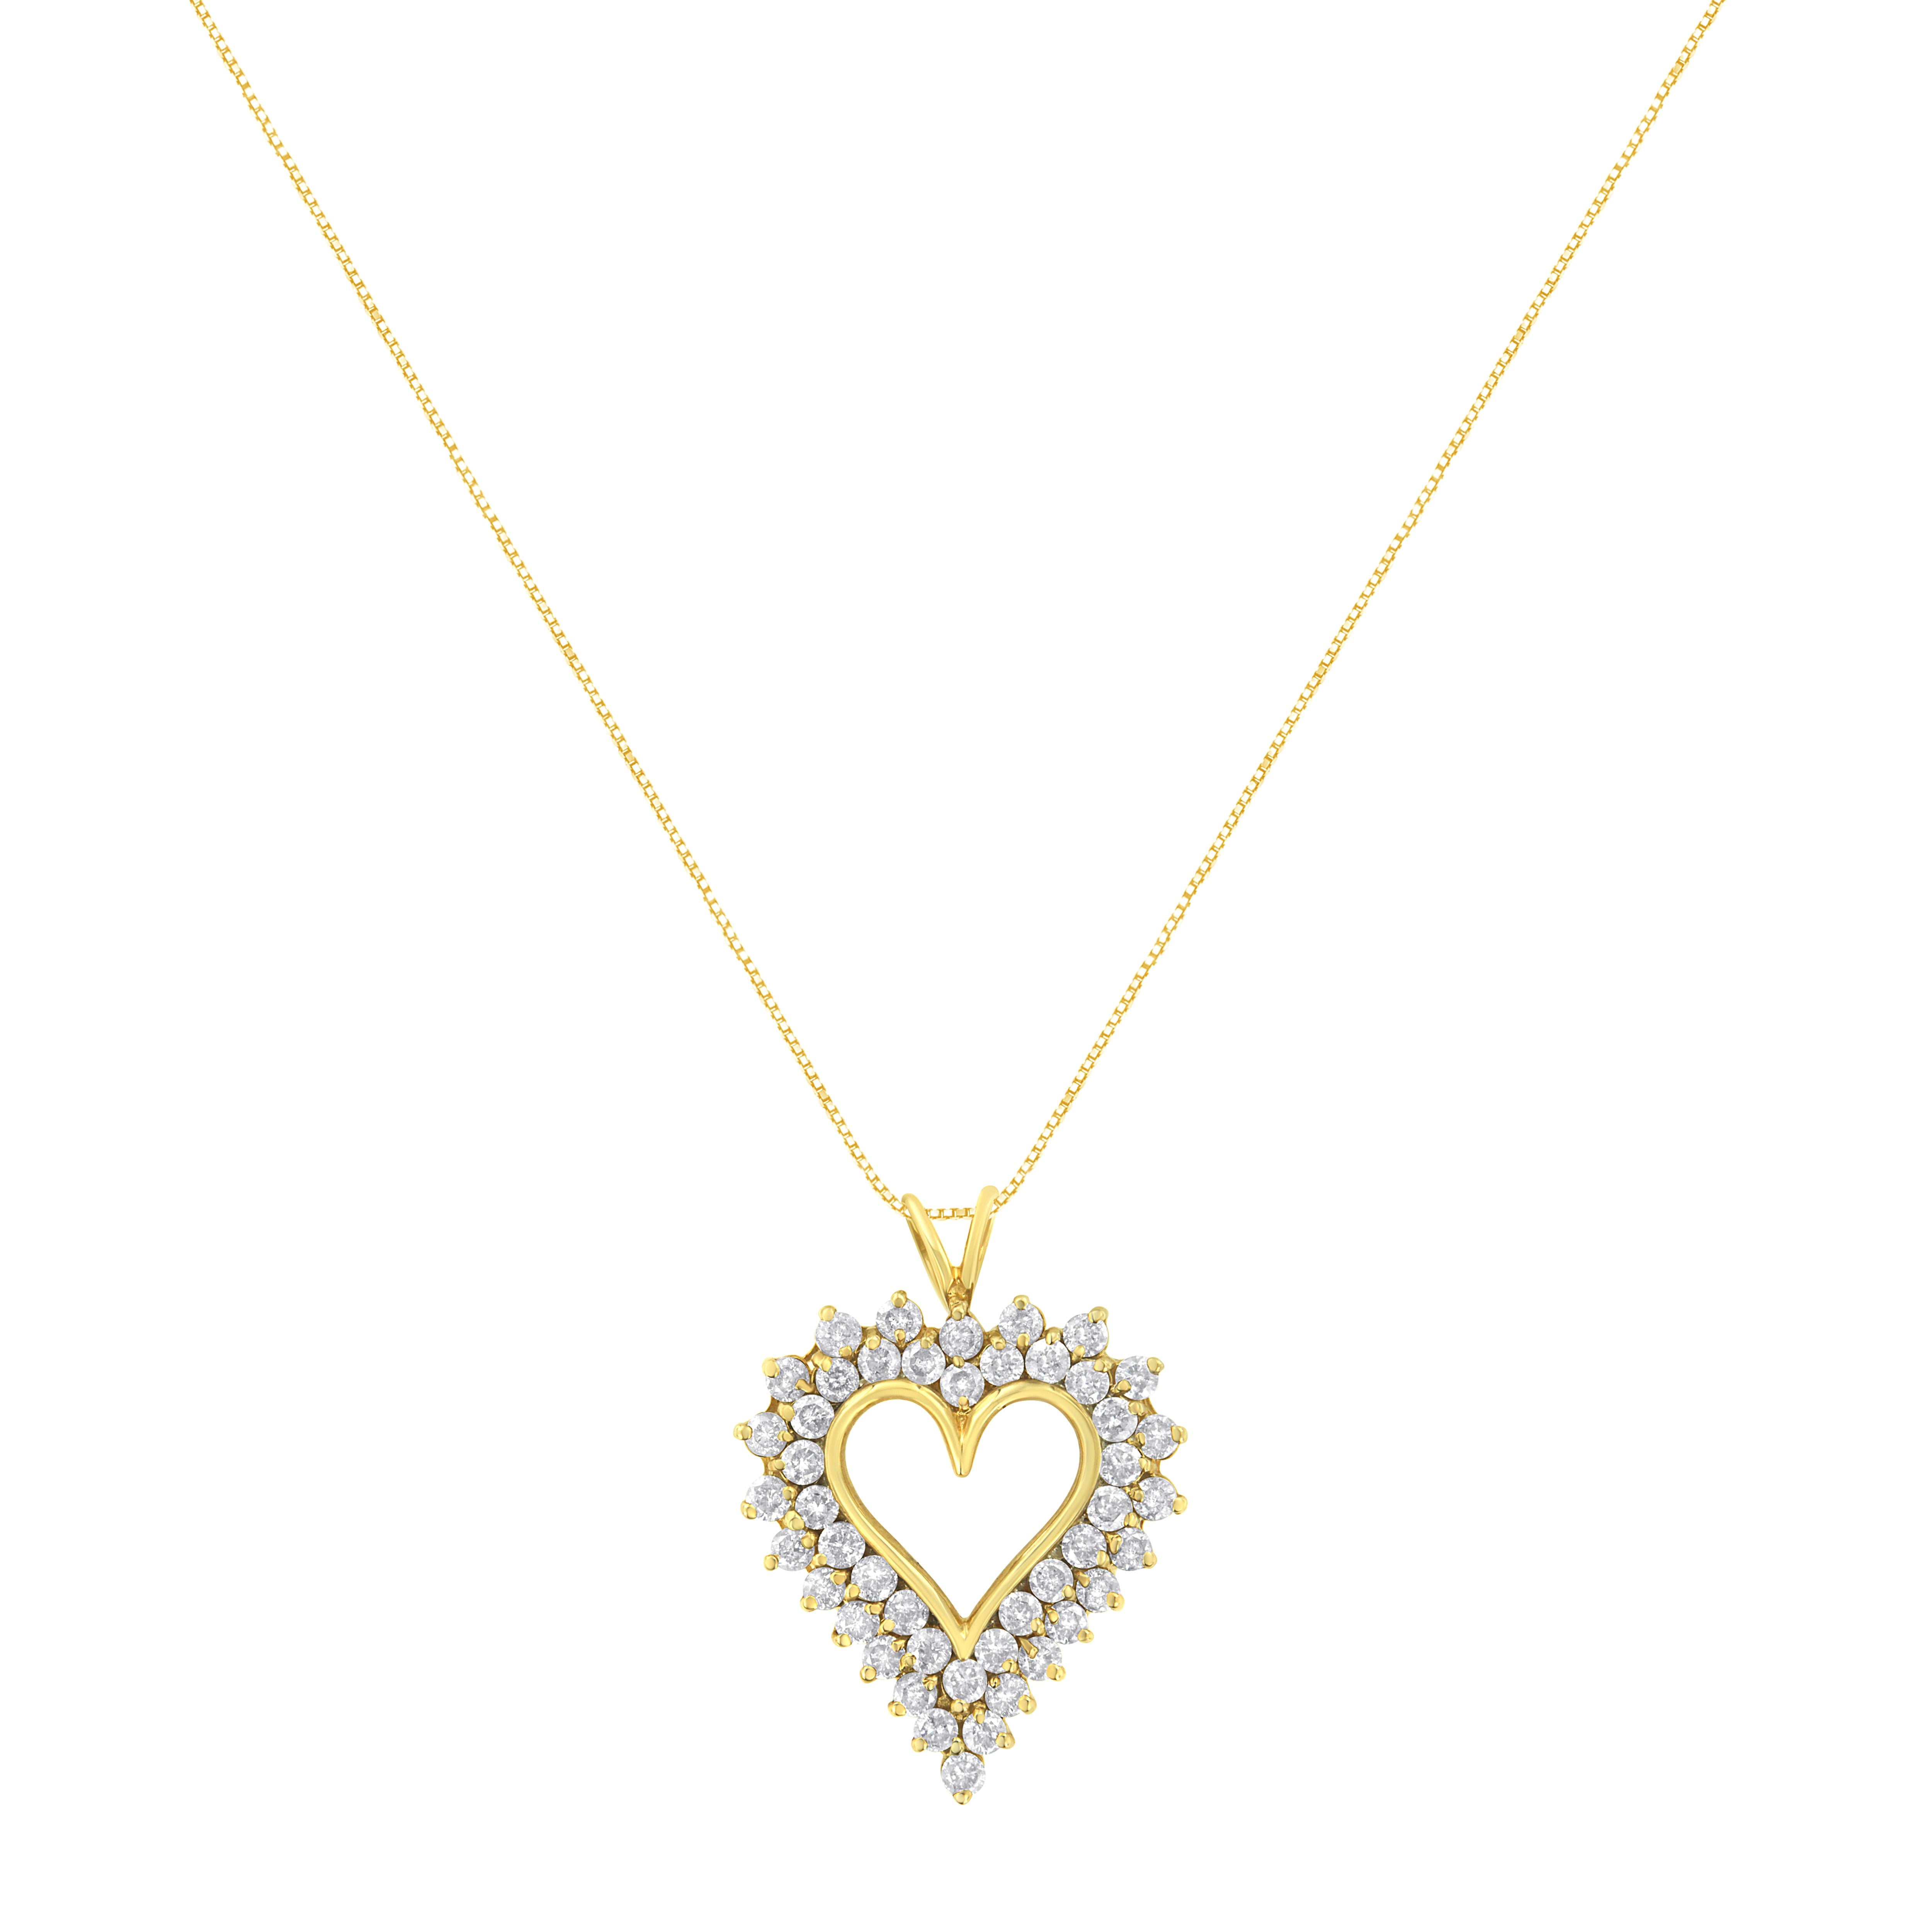 Chic and timeless, this gorgeous heart pendant has an impressive total diamond weight of 4.0 carats. Natural, sparkling round-cut diamonds dazzle in this 14k yellow gold plated .925 sterling silver necklace. This is the perfect accessory for a